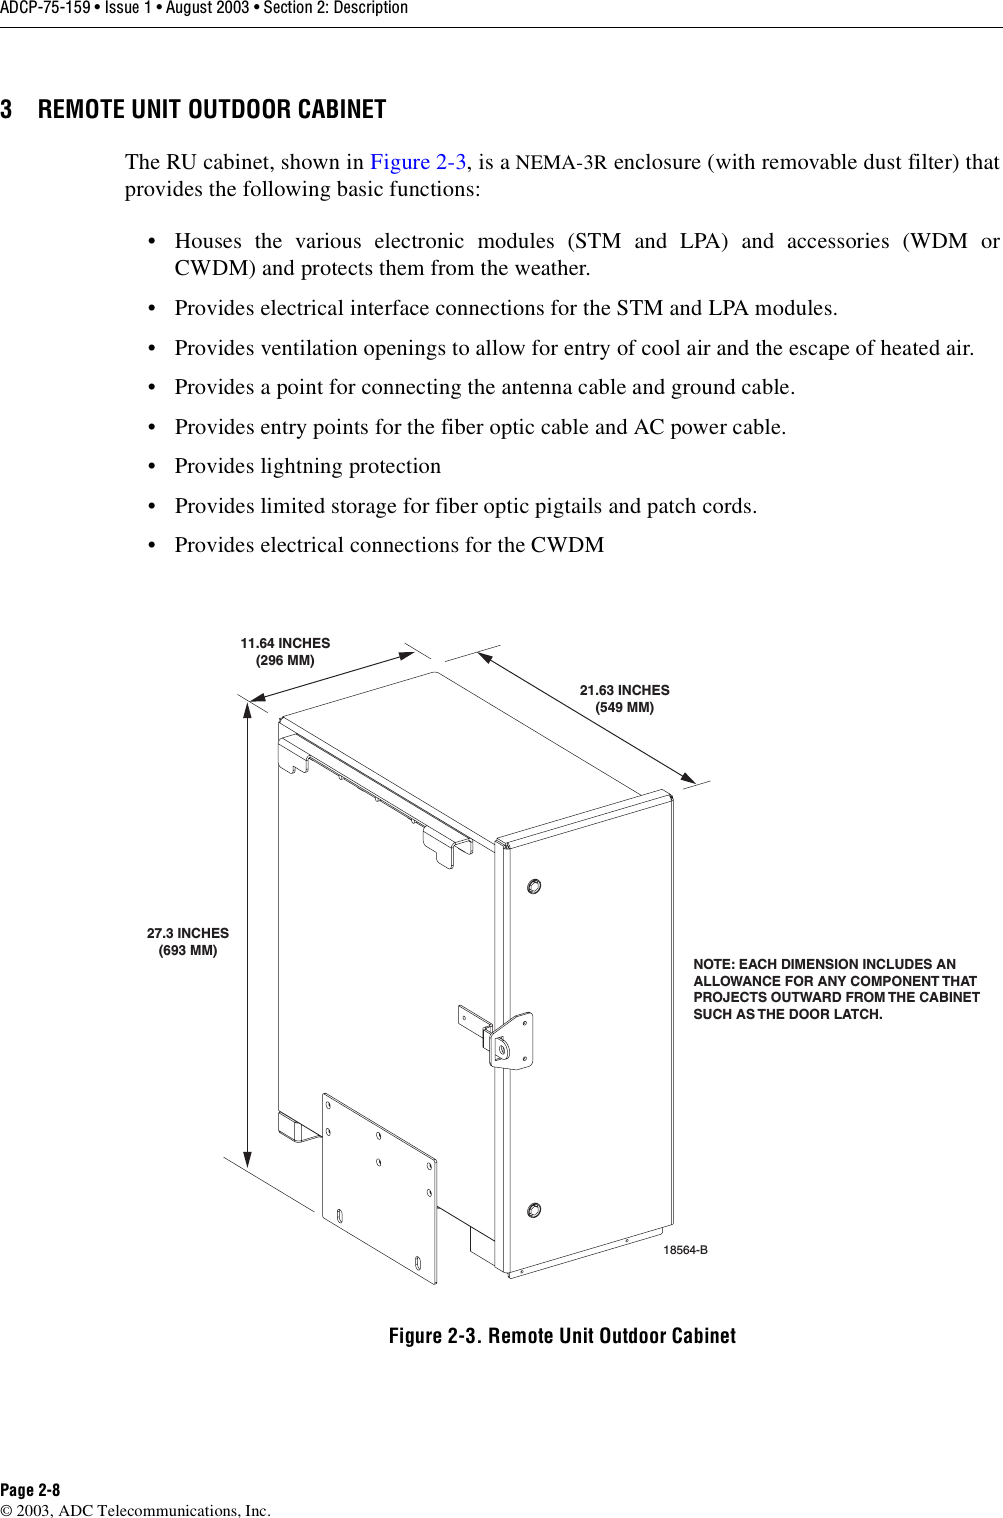 ADCP-75-159 • Issue 1 • August 2003 • Section 2: DescriptionPage 2-8© 2003, ADC Telecommunications, Inc.3 REMOTE UNIT OUTDOOR CABINETThe RU cabinet, shown in Figure 2-3, is a NEMA-3R enclosure (with removable dust filter) thatprovides the following basic functions: • Houses the various electronic modules (STM and LPA) and accessories (WDM orCWDM) and protects them from the weather. • Provides electrical interface connections for the STM and LPA modules. • Provides ventilation openings to allow for entry of cool air and the escape of heated air. • Provides a point for connecting the antenna cable and ground cable. • Provides entry points for the fiber optic cable and AC power cable. • Provides lightning protection• Provides limited storage for fiber optic pigtails and patch cords. • Provides electrical connections for the CWDMFigure 2-3. Remote Unit Outdoor CabinetNOTE: EACH DIMENSION INCLUDES ANALLOWANCE FOR ANY COMPONENT THATPROJECTS OUTWARD FROM THE CABINETSUCH AS THE DOOR LATCH. 18564-B27.3 INCHES(693 MM)11.64 INCHES(296 MM)21.63 INCHES(549 MM)